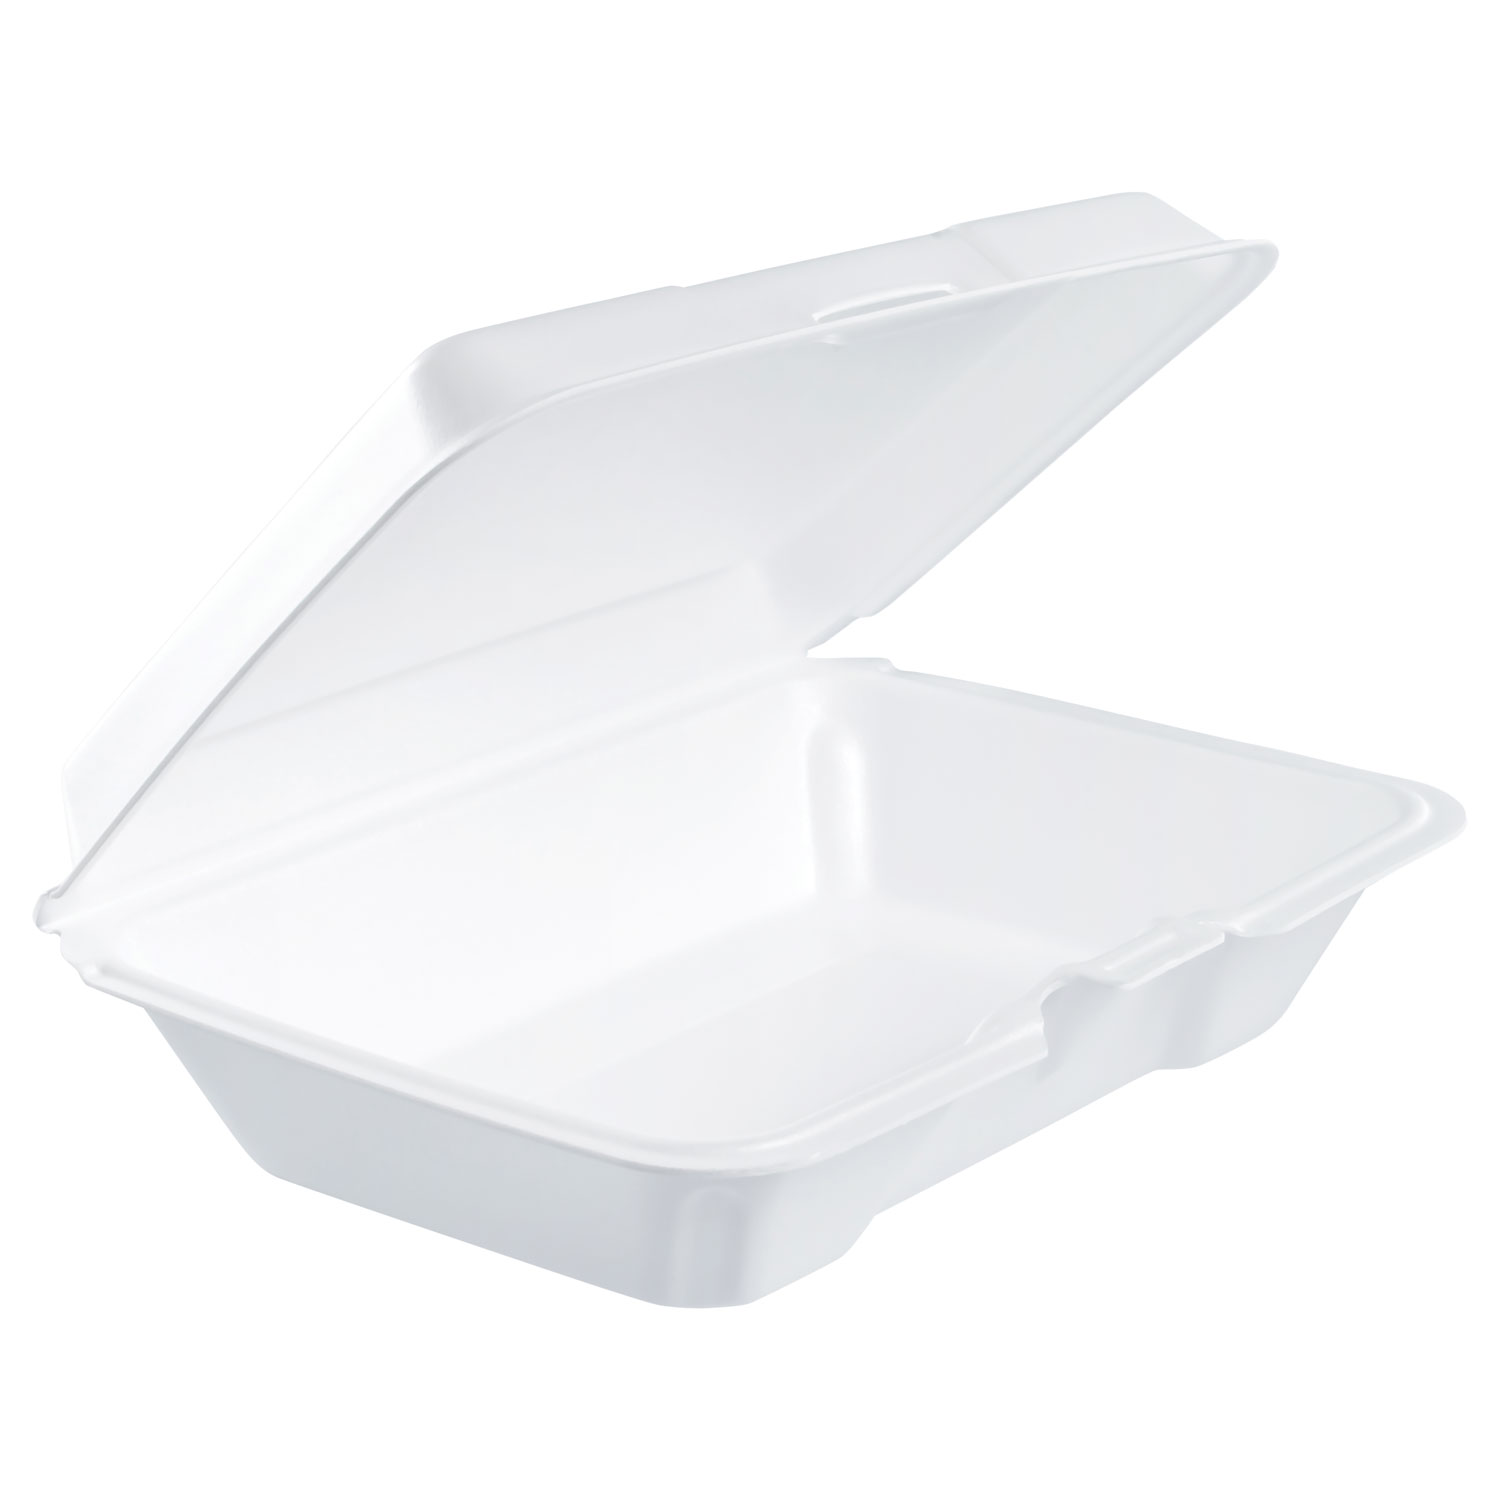  Dart 206HT1R Foam Hinged Lid Containers, 6.4w x 9.3d x 2.6h, White, 200/Carton (DCC206HT1R) 